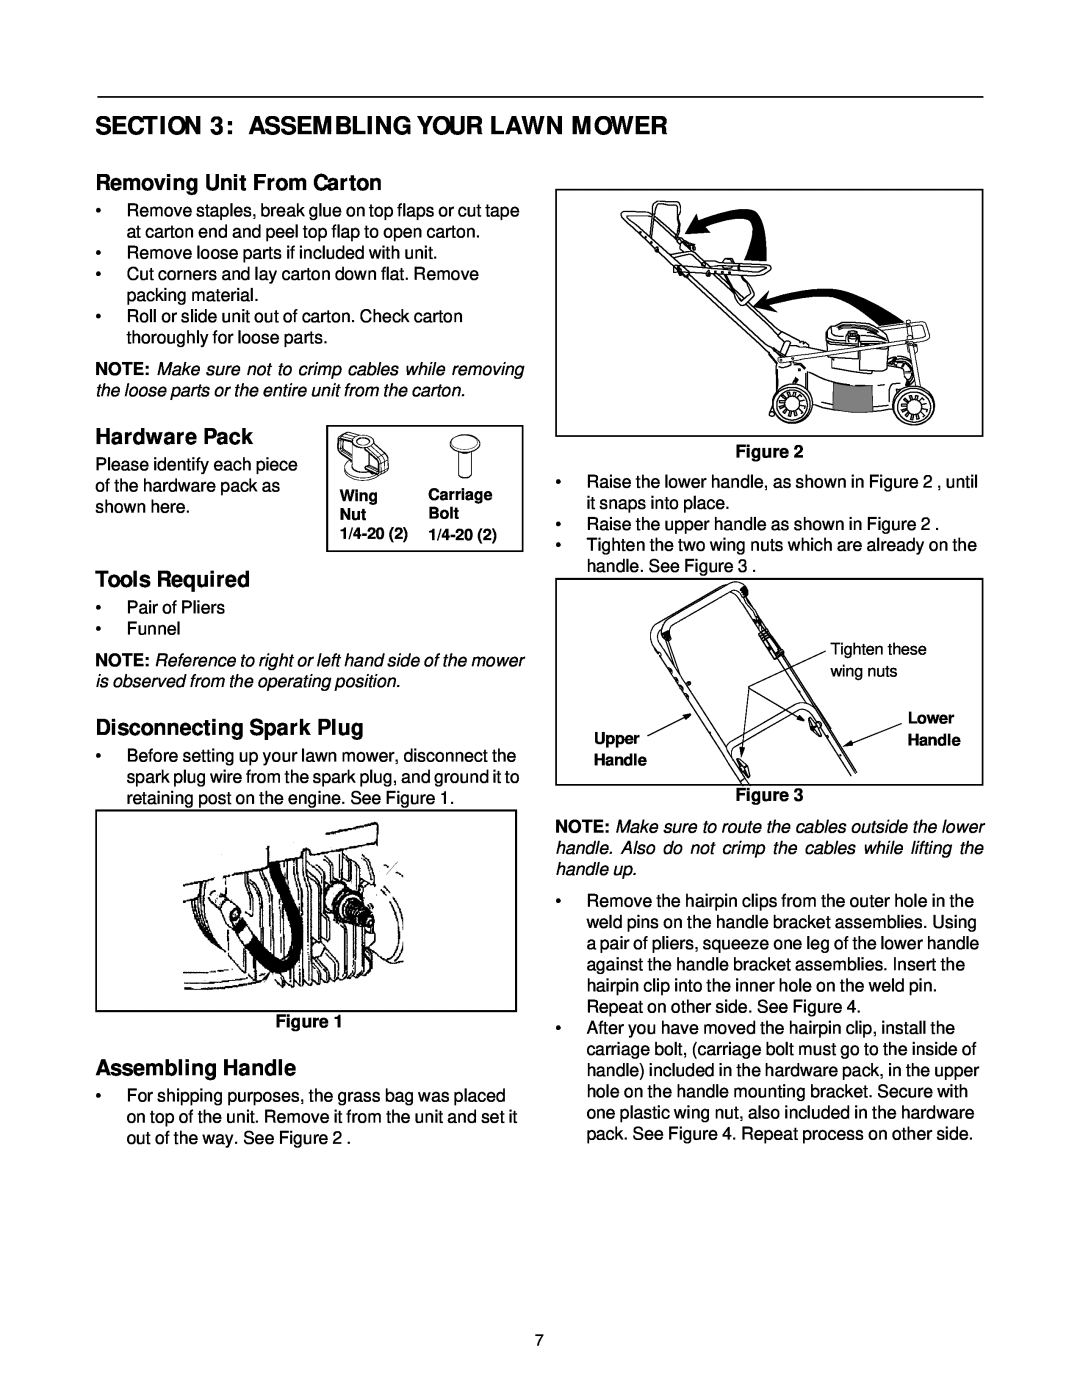 Bolens 436 Assembling Your Lawn Mower, Removing Unit From Carton, Hardware Pack, Tools Required, Disconnecting Spark Plug 